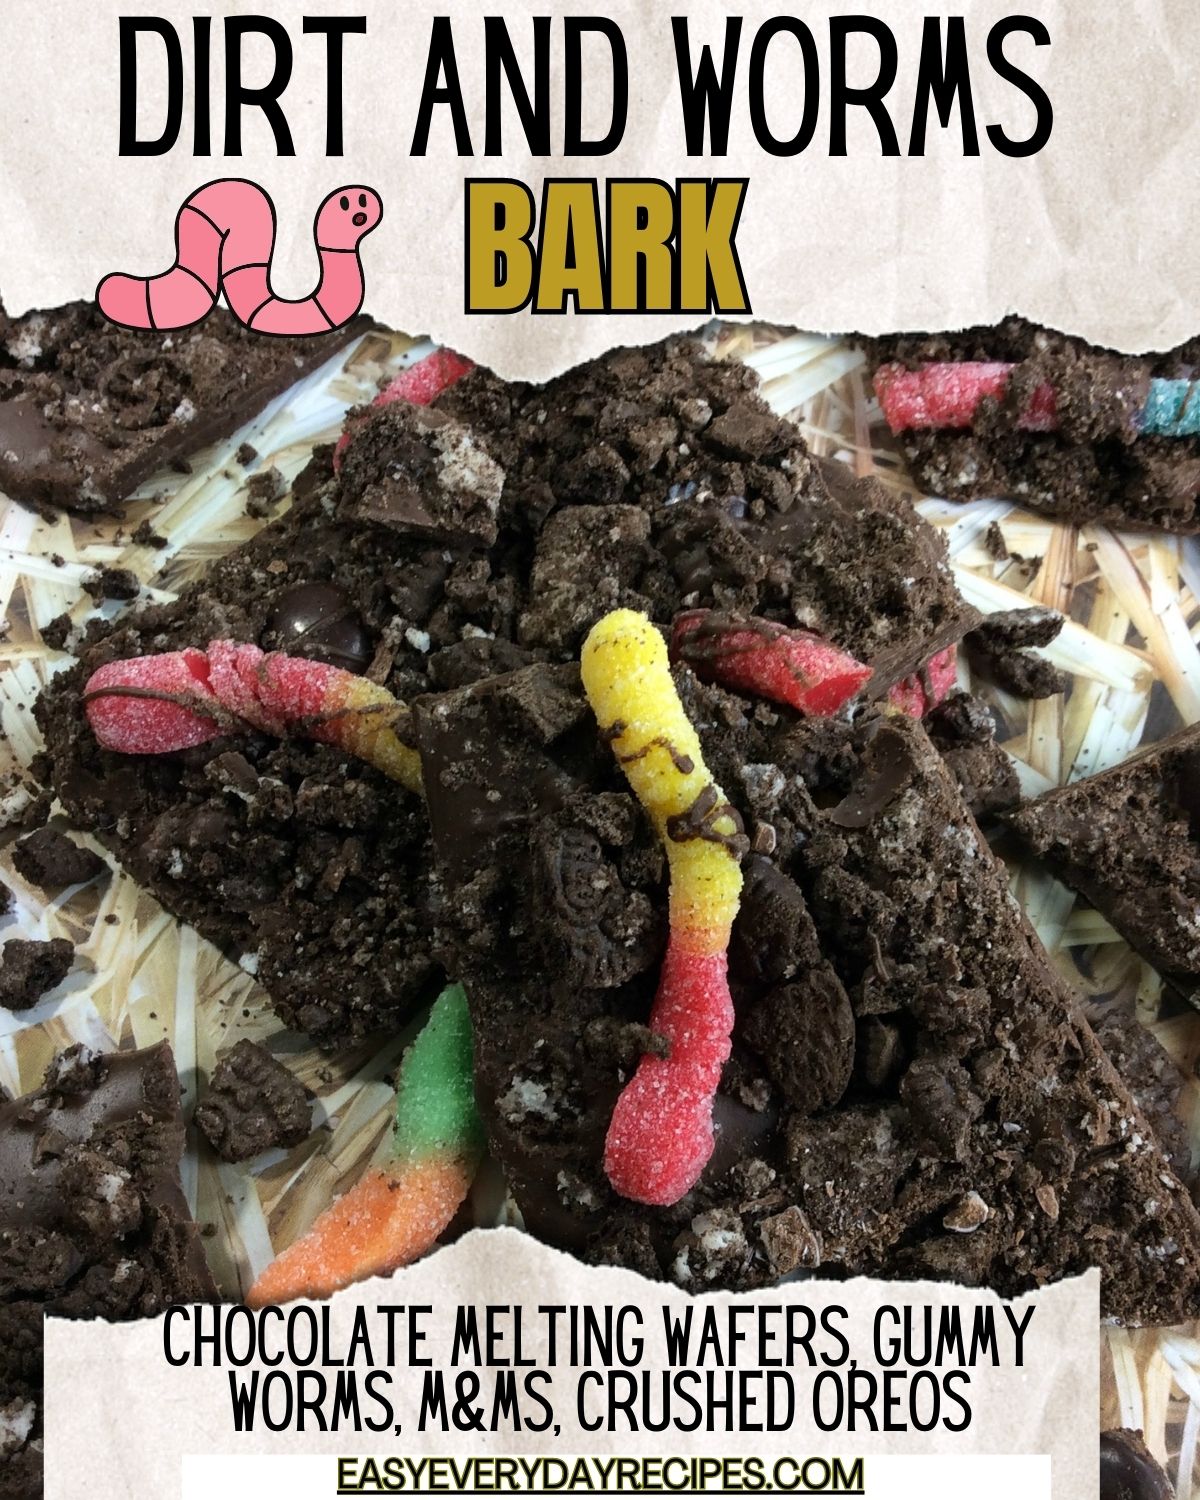 Dirt and worms bark.